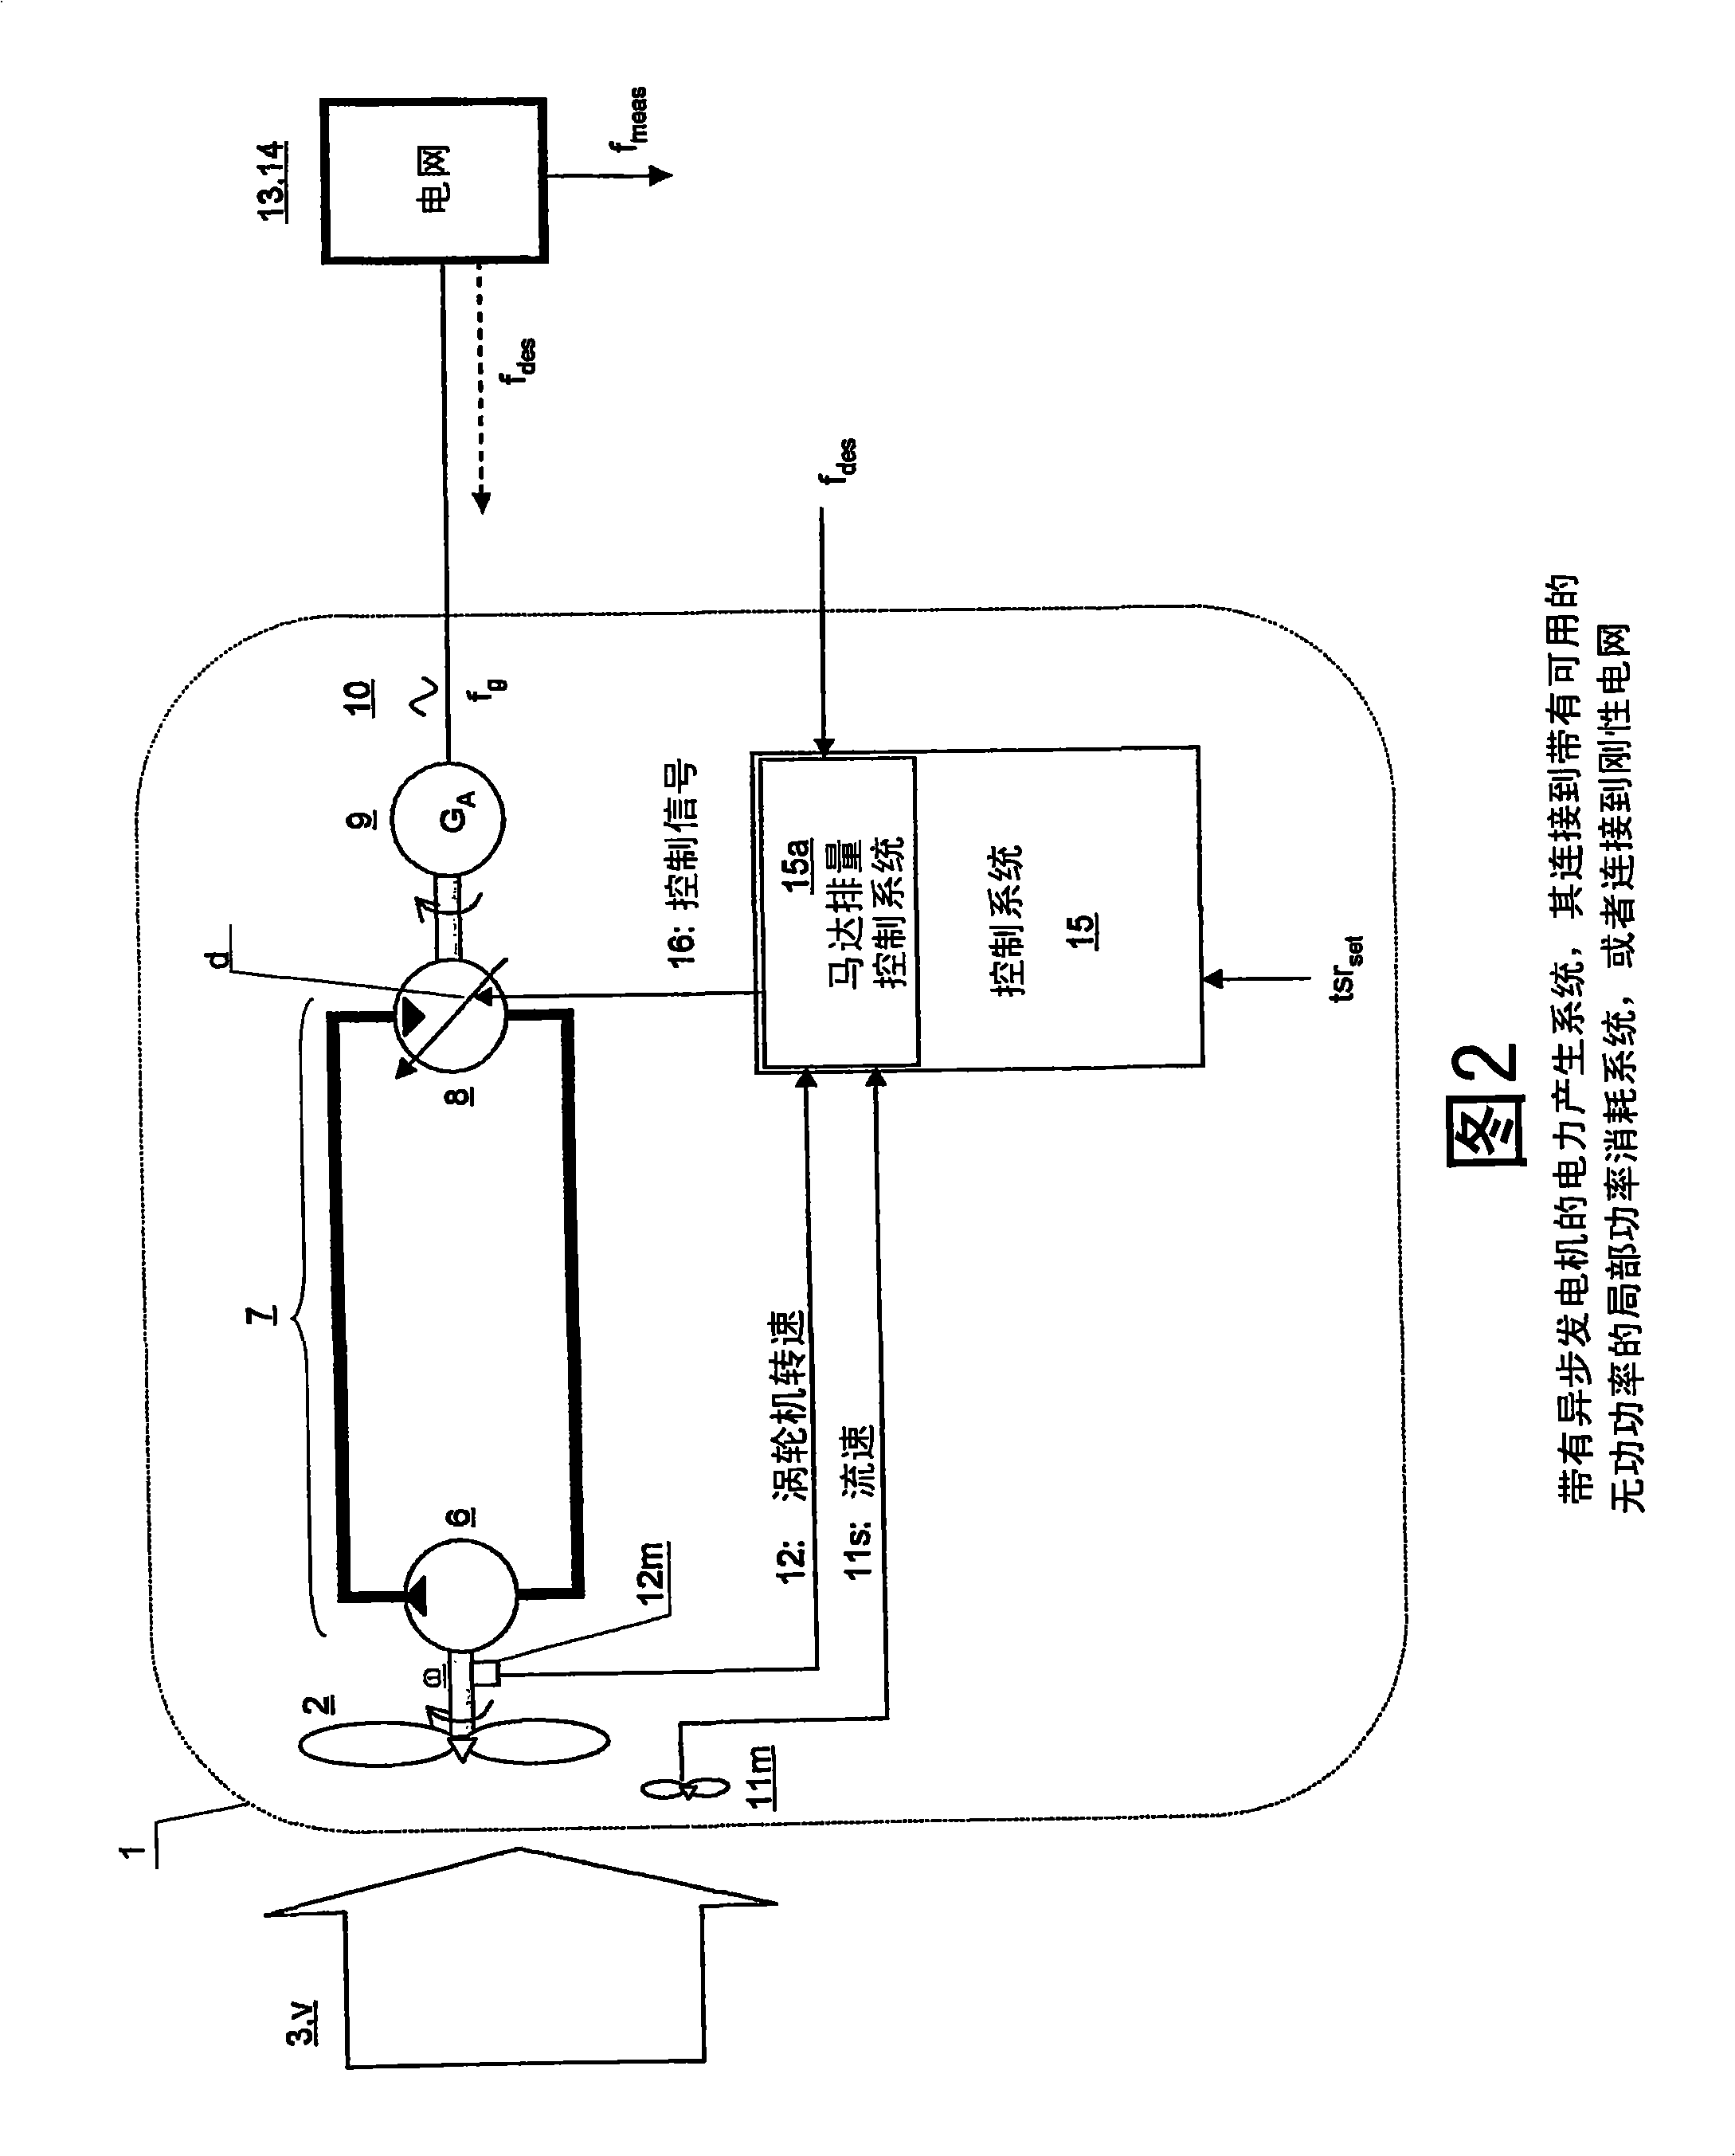 A turbine driven electric power production system and a method for control thereof